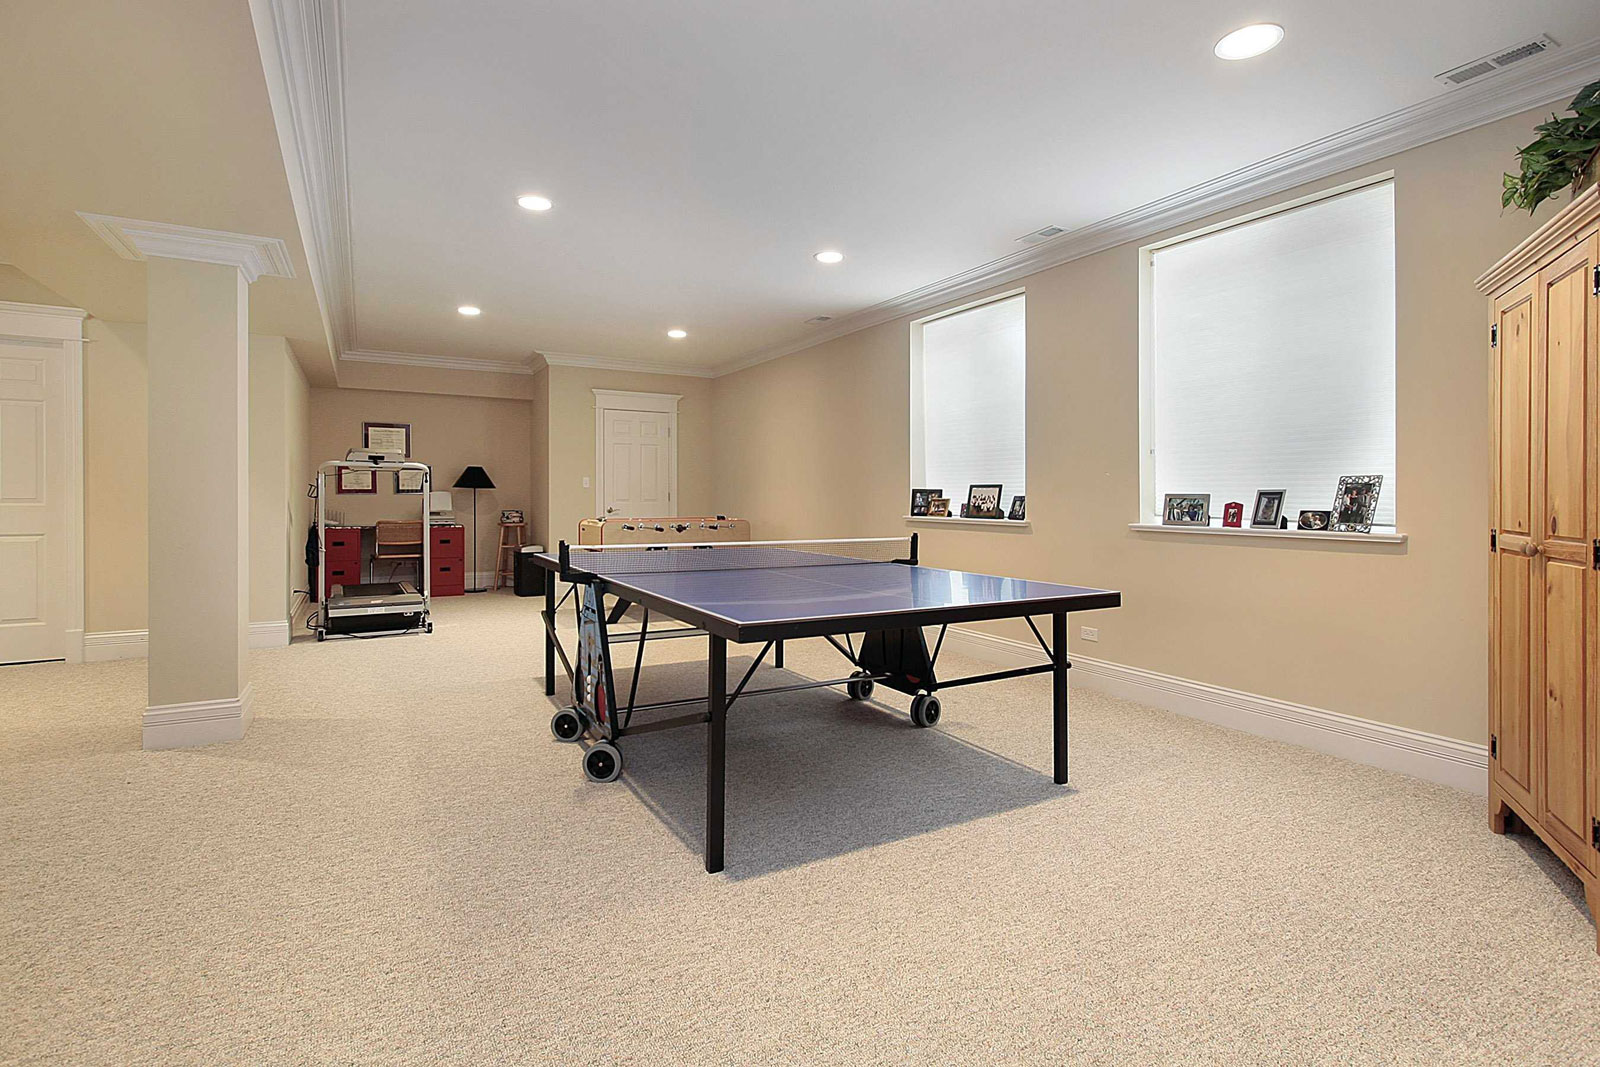 Finishing Ideas Modern Impressive Basement Finishing Ideas Decorated With Modern Design Completed With Ping Pong Table And Cream Wall Color Design Ideas Basement Basement Finishing Ideas Leading To Stunning Results